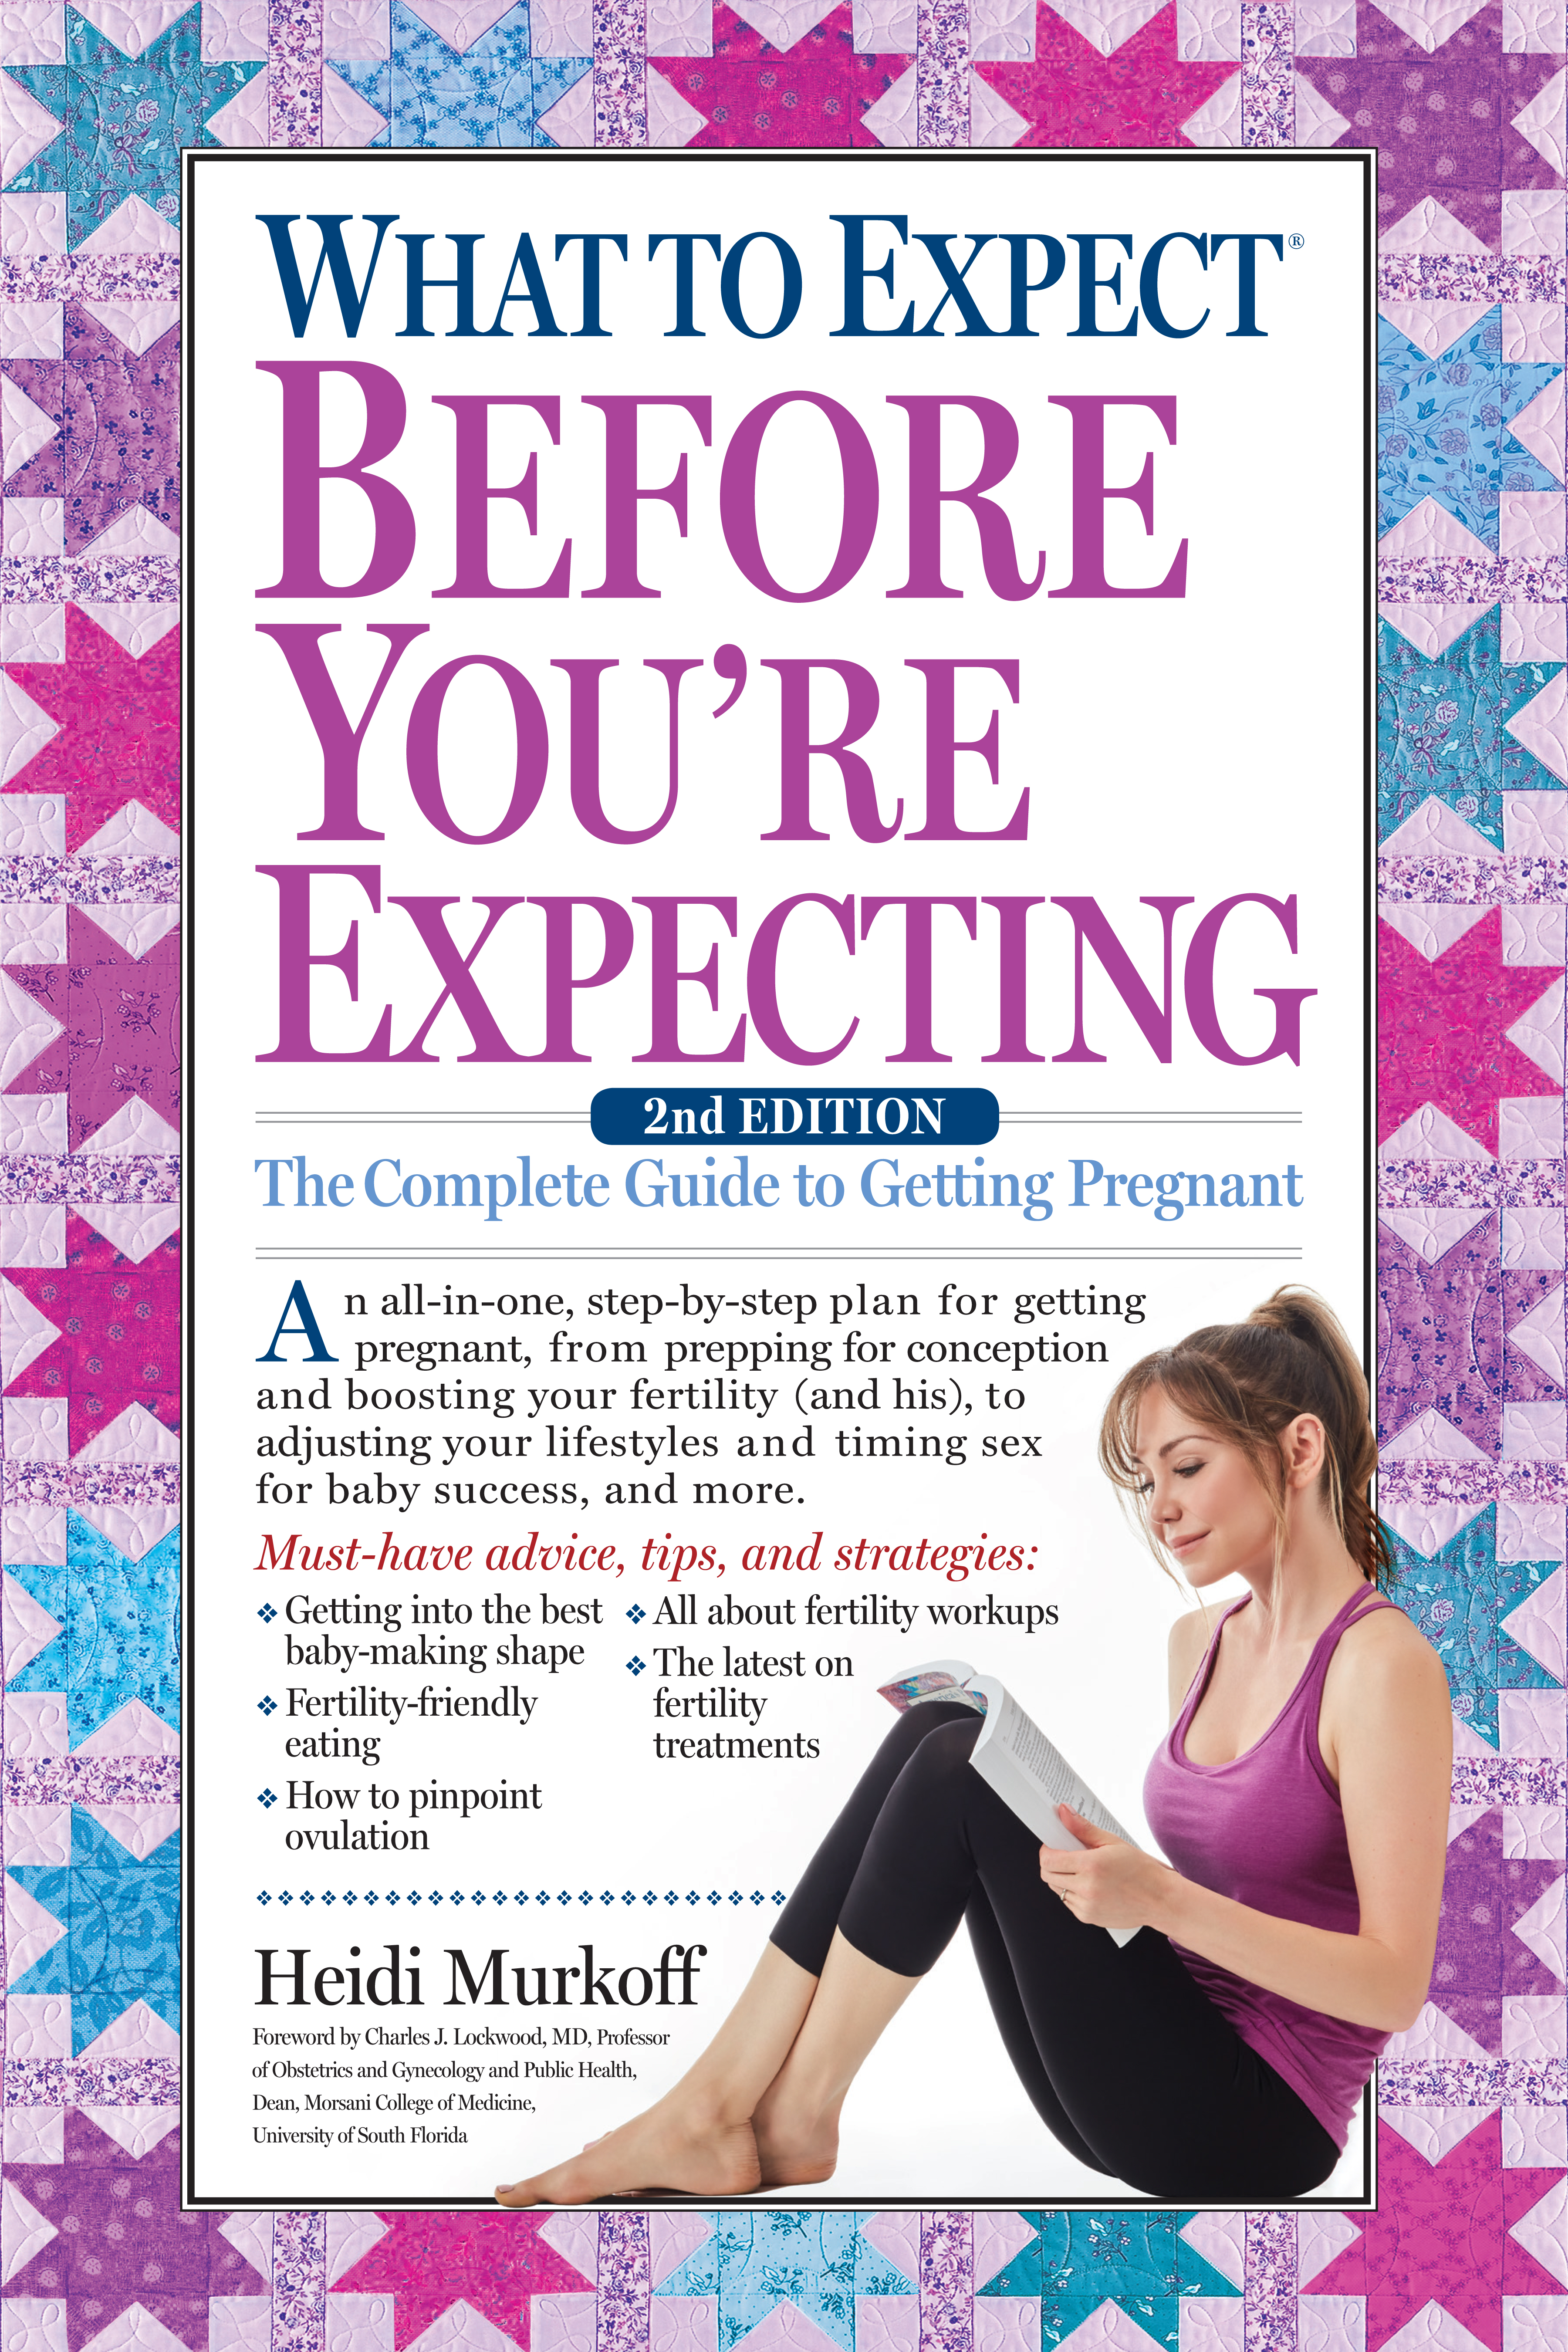 What to Expect Before Youre Expecting by Heidi Murkoff Hachette Book Group